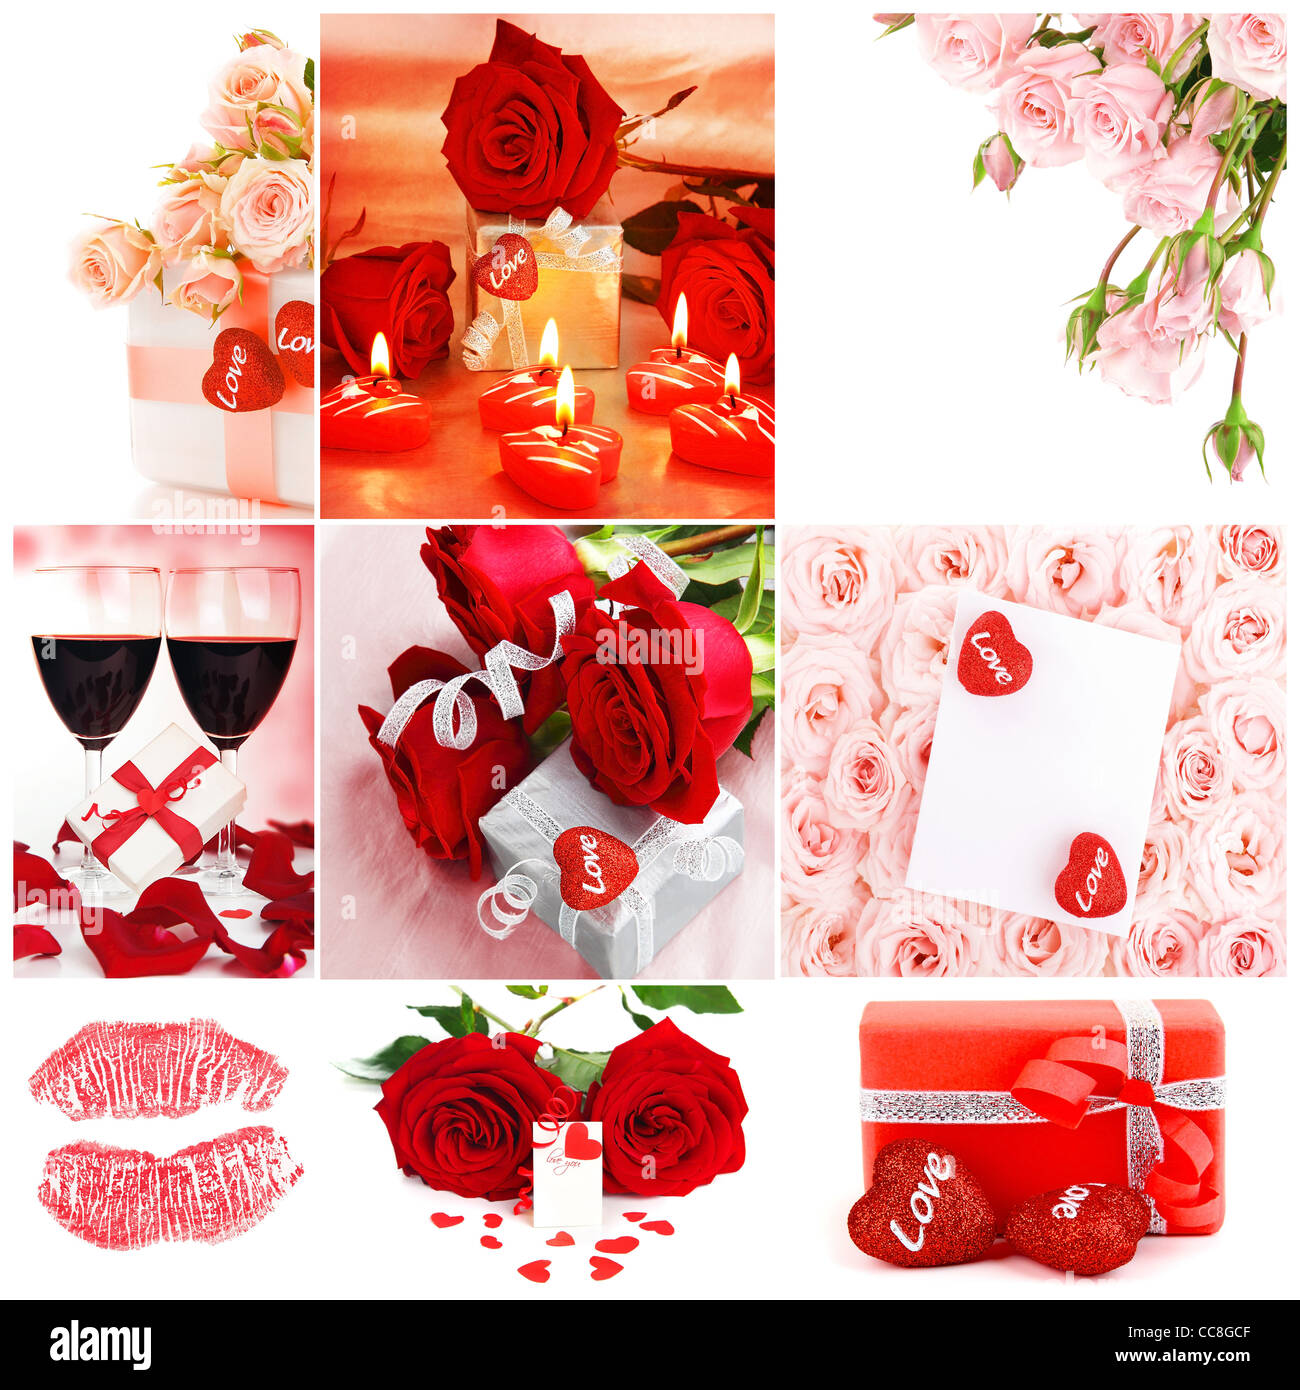 Love concept collage with various images of roses, gifts , hearts & cards Stock Photo